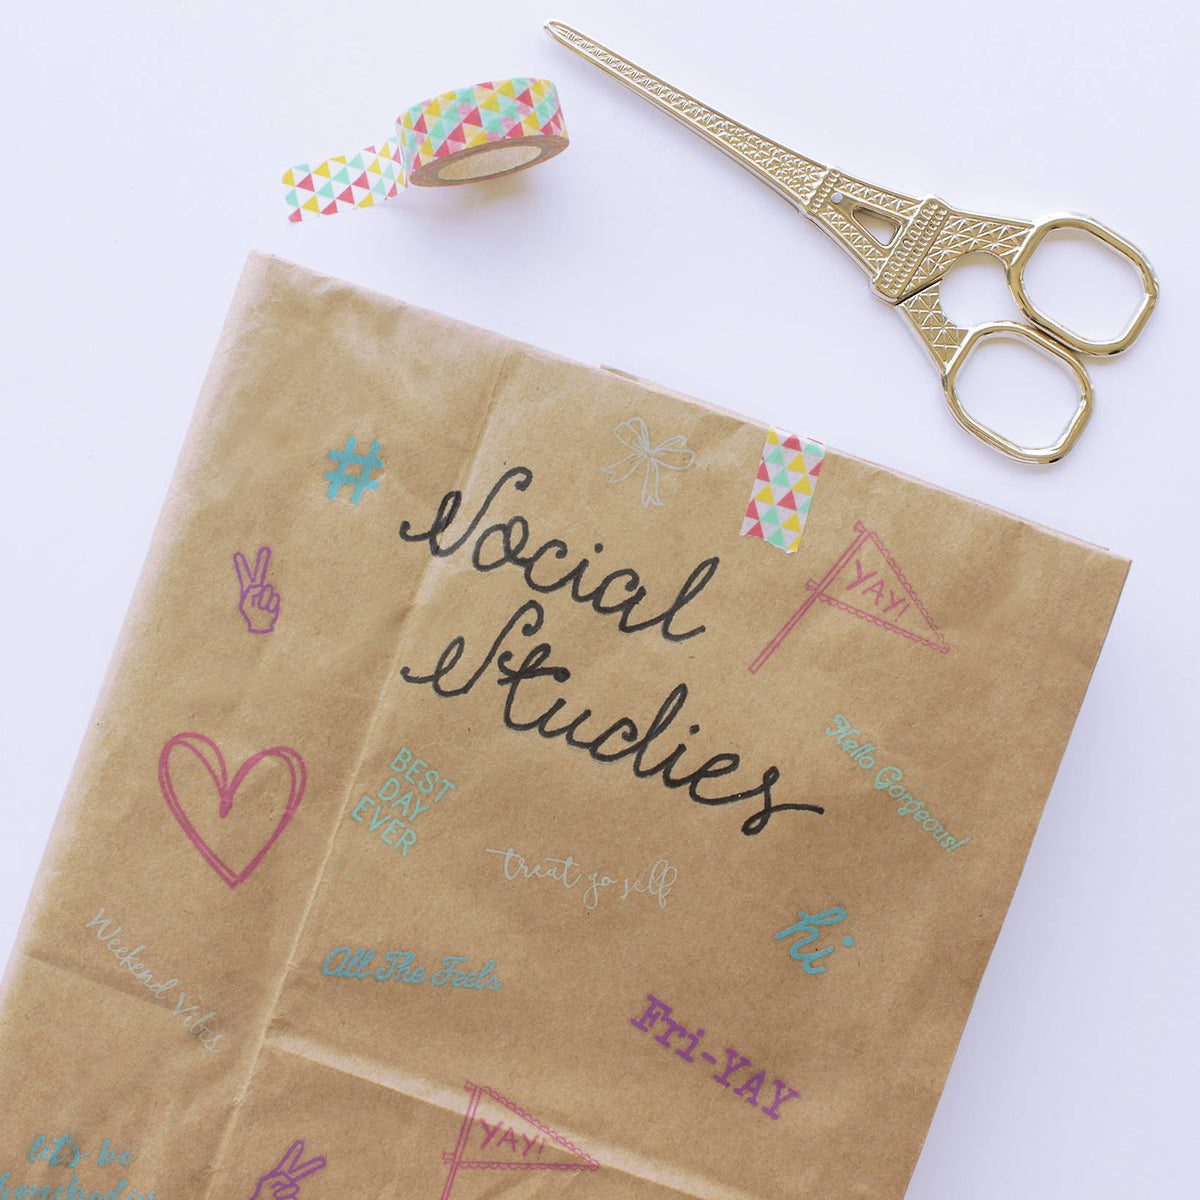 How To Make A Paper Bag Book Cover (With Step-By-Step Pictures!)